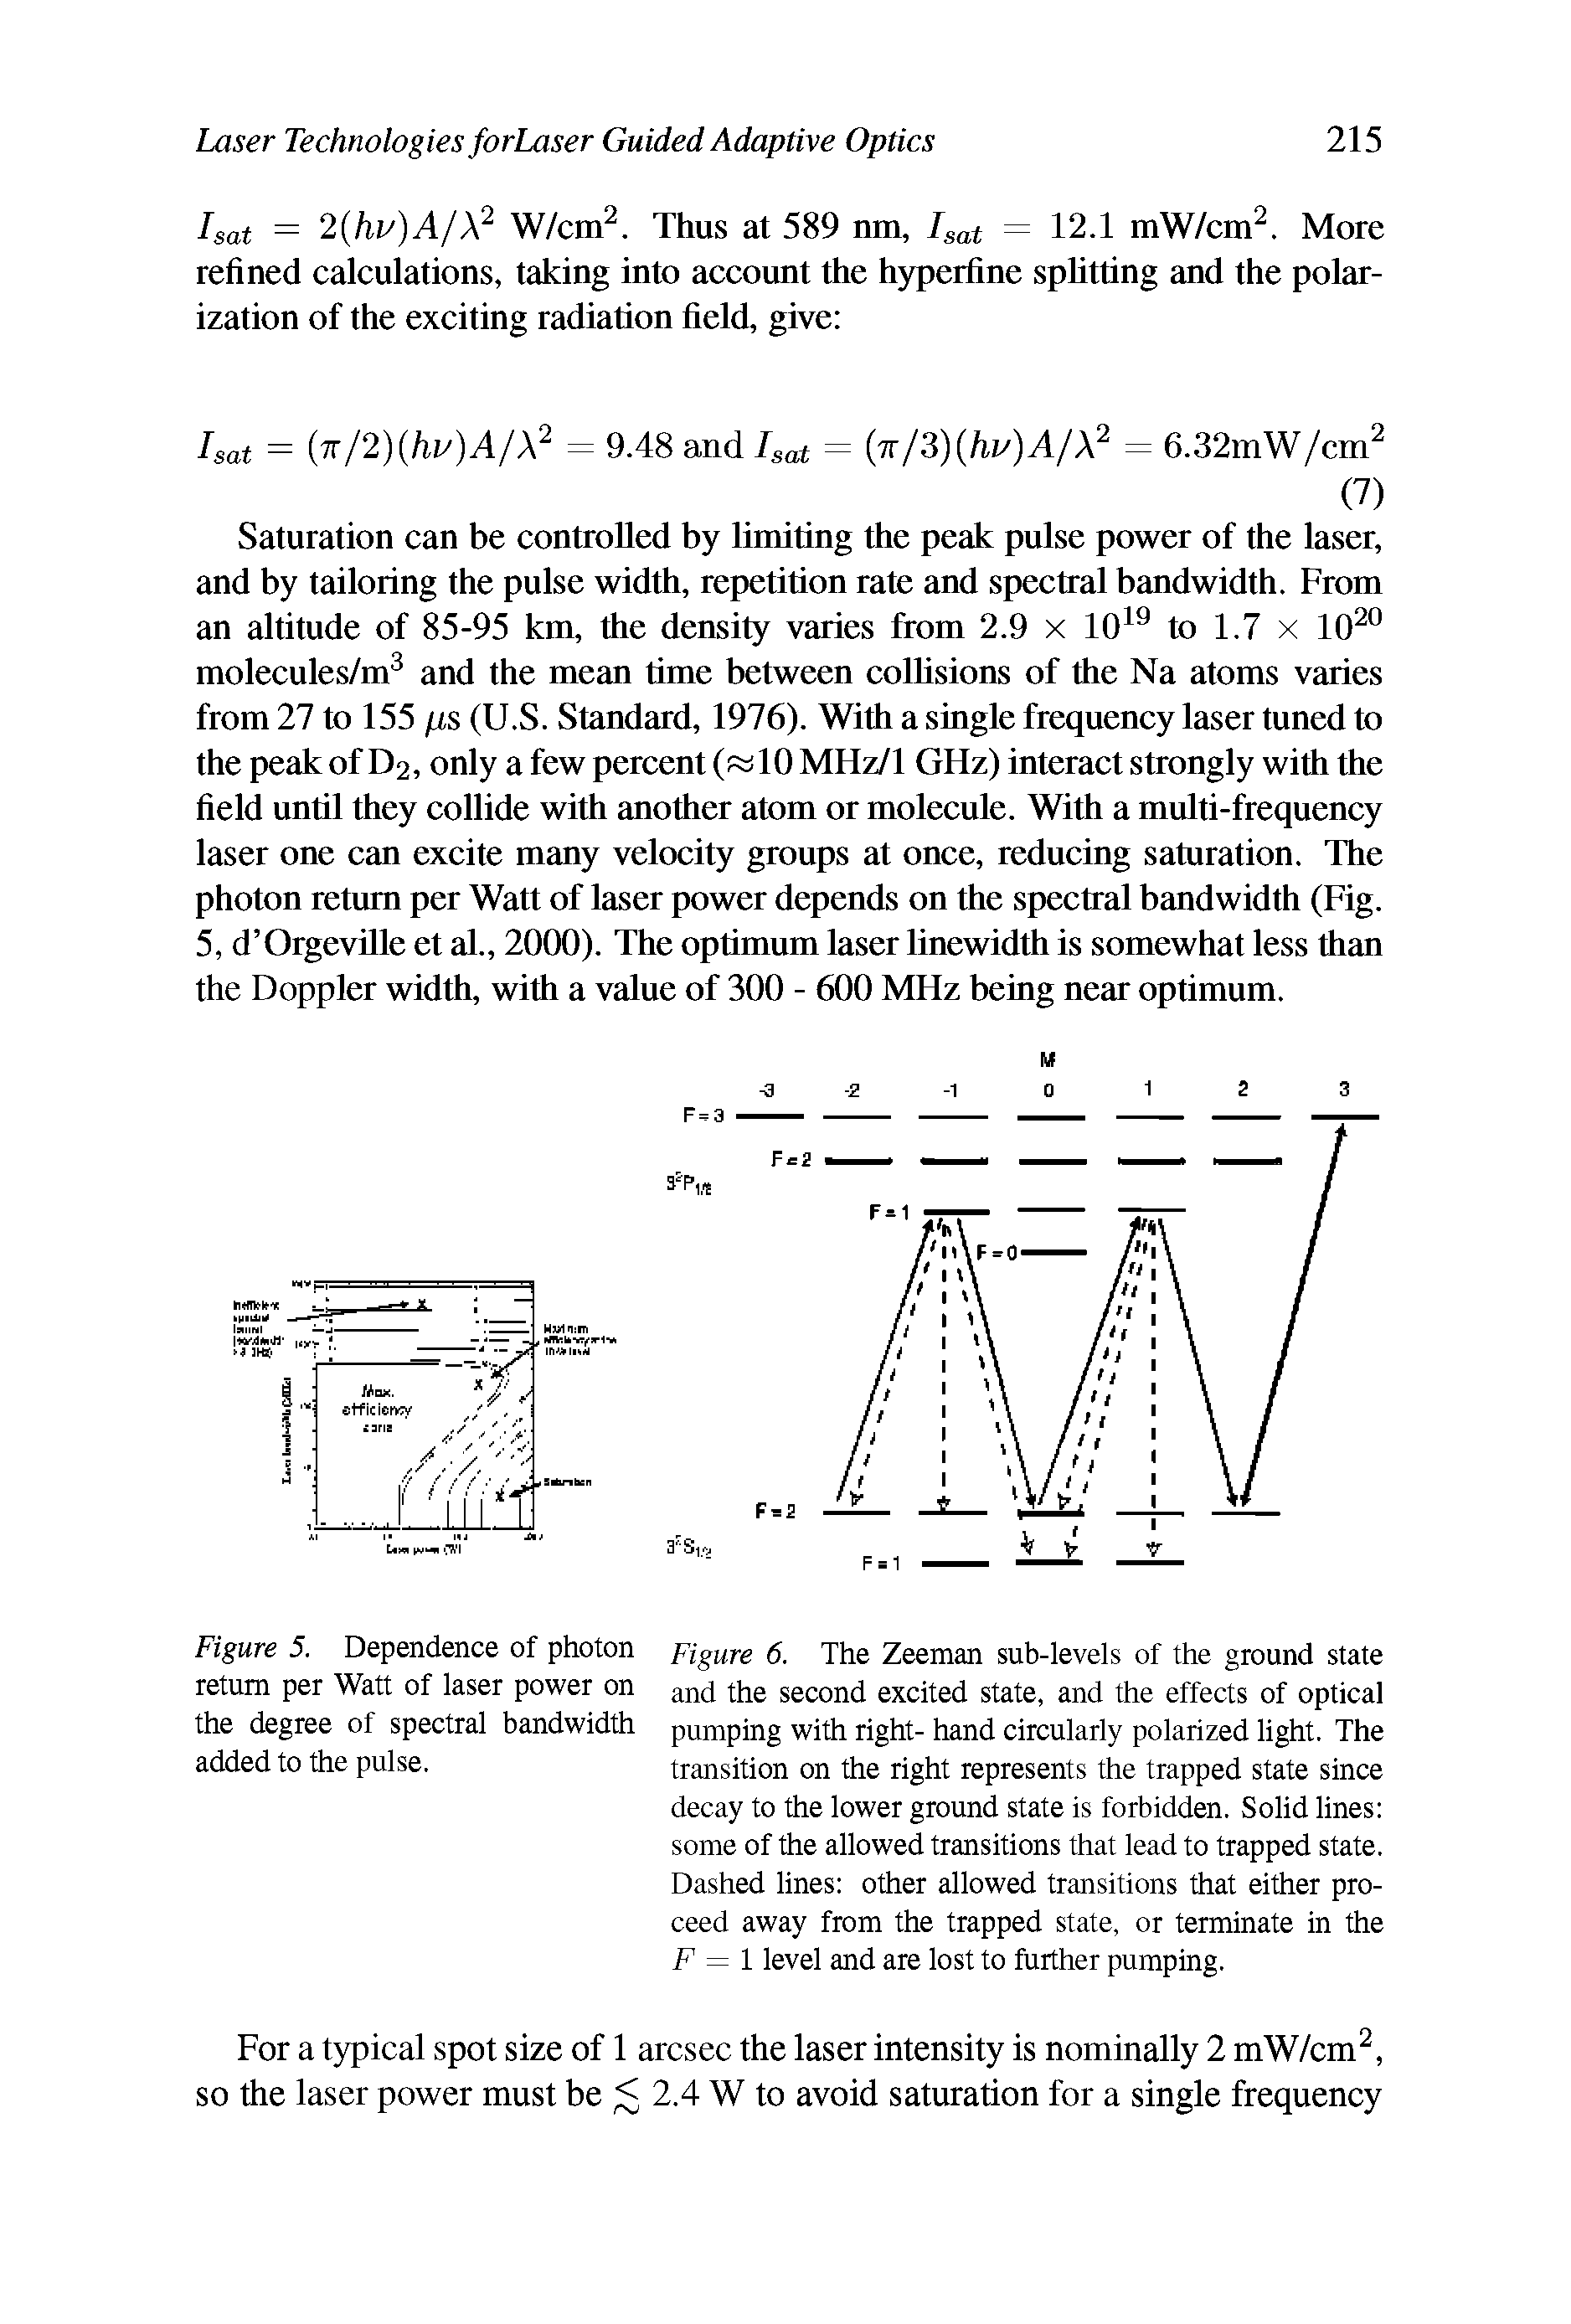 Figure 5. Dependence of photon Figure 6. The Zeeman sub-levels of the ground state return per Watt of laser power on second excited state, and the effects of optical...